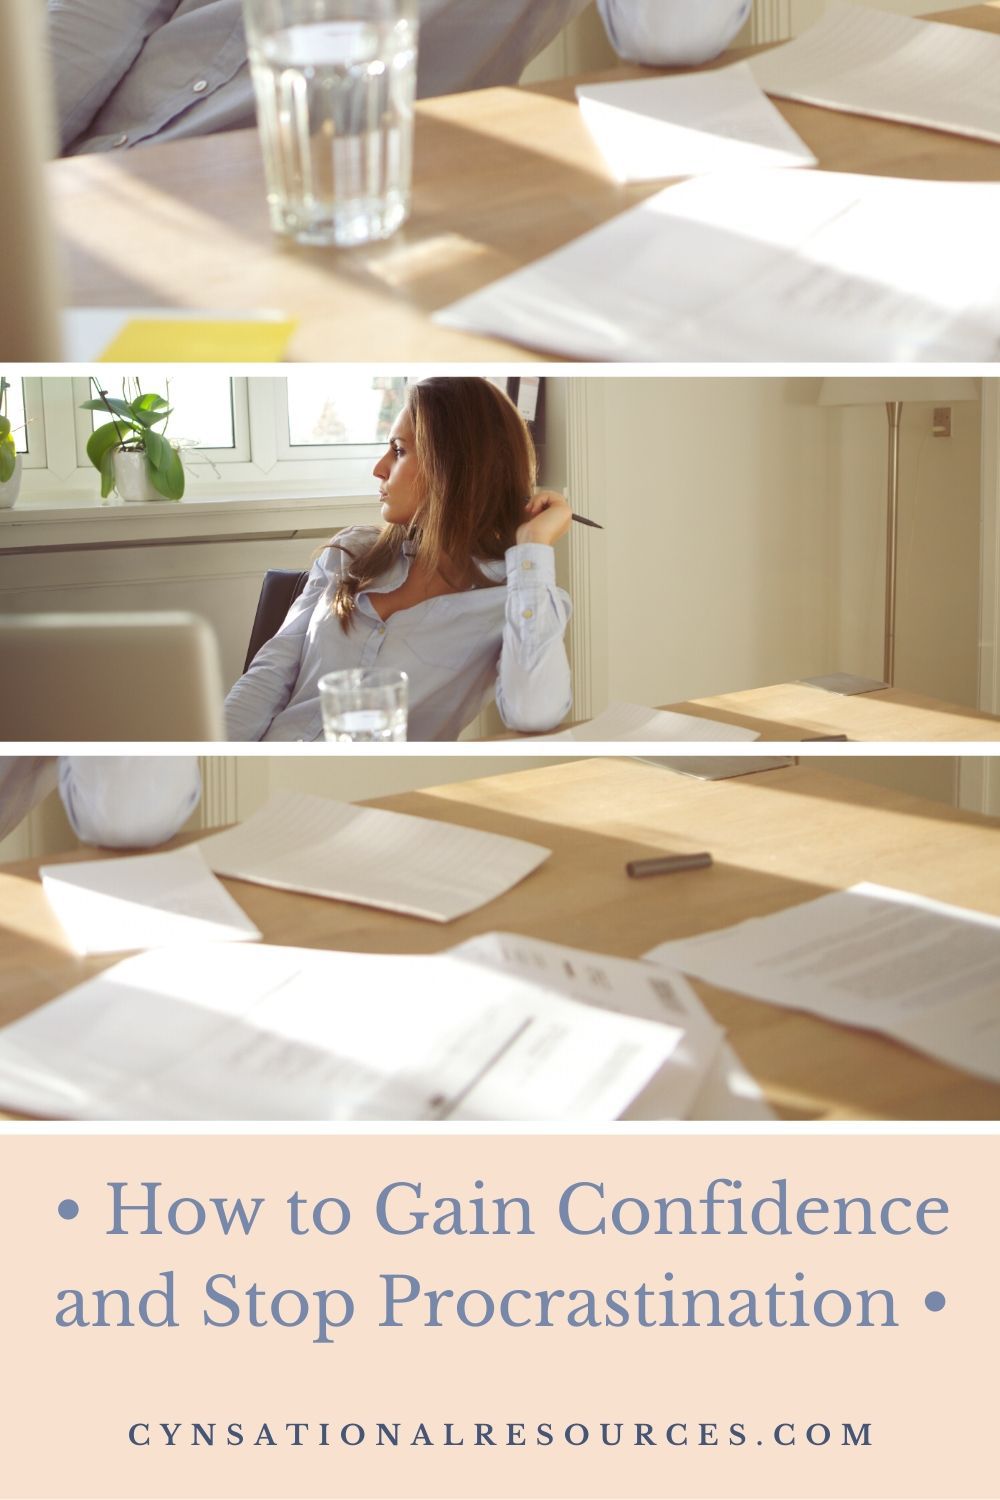 How to Gain Confidence and Stop Procrastination